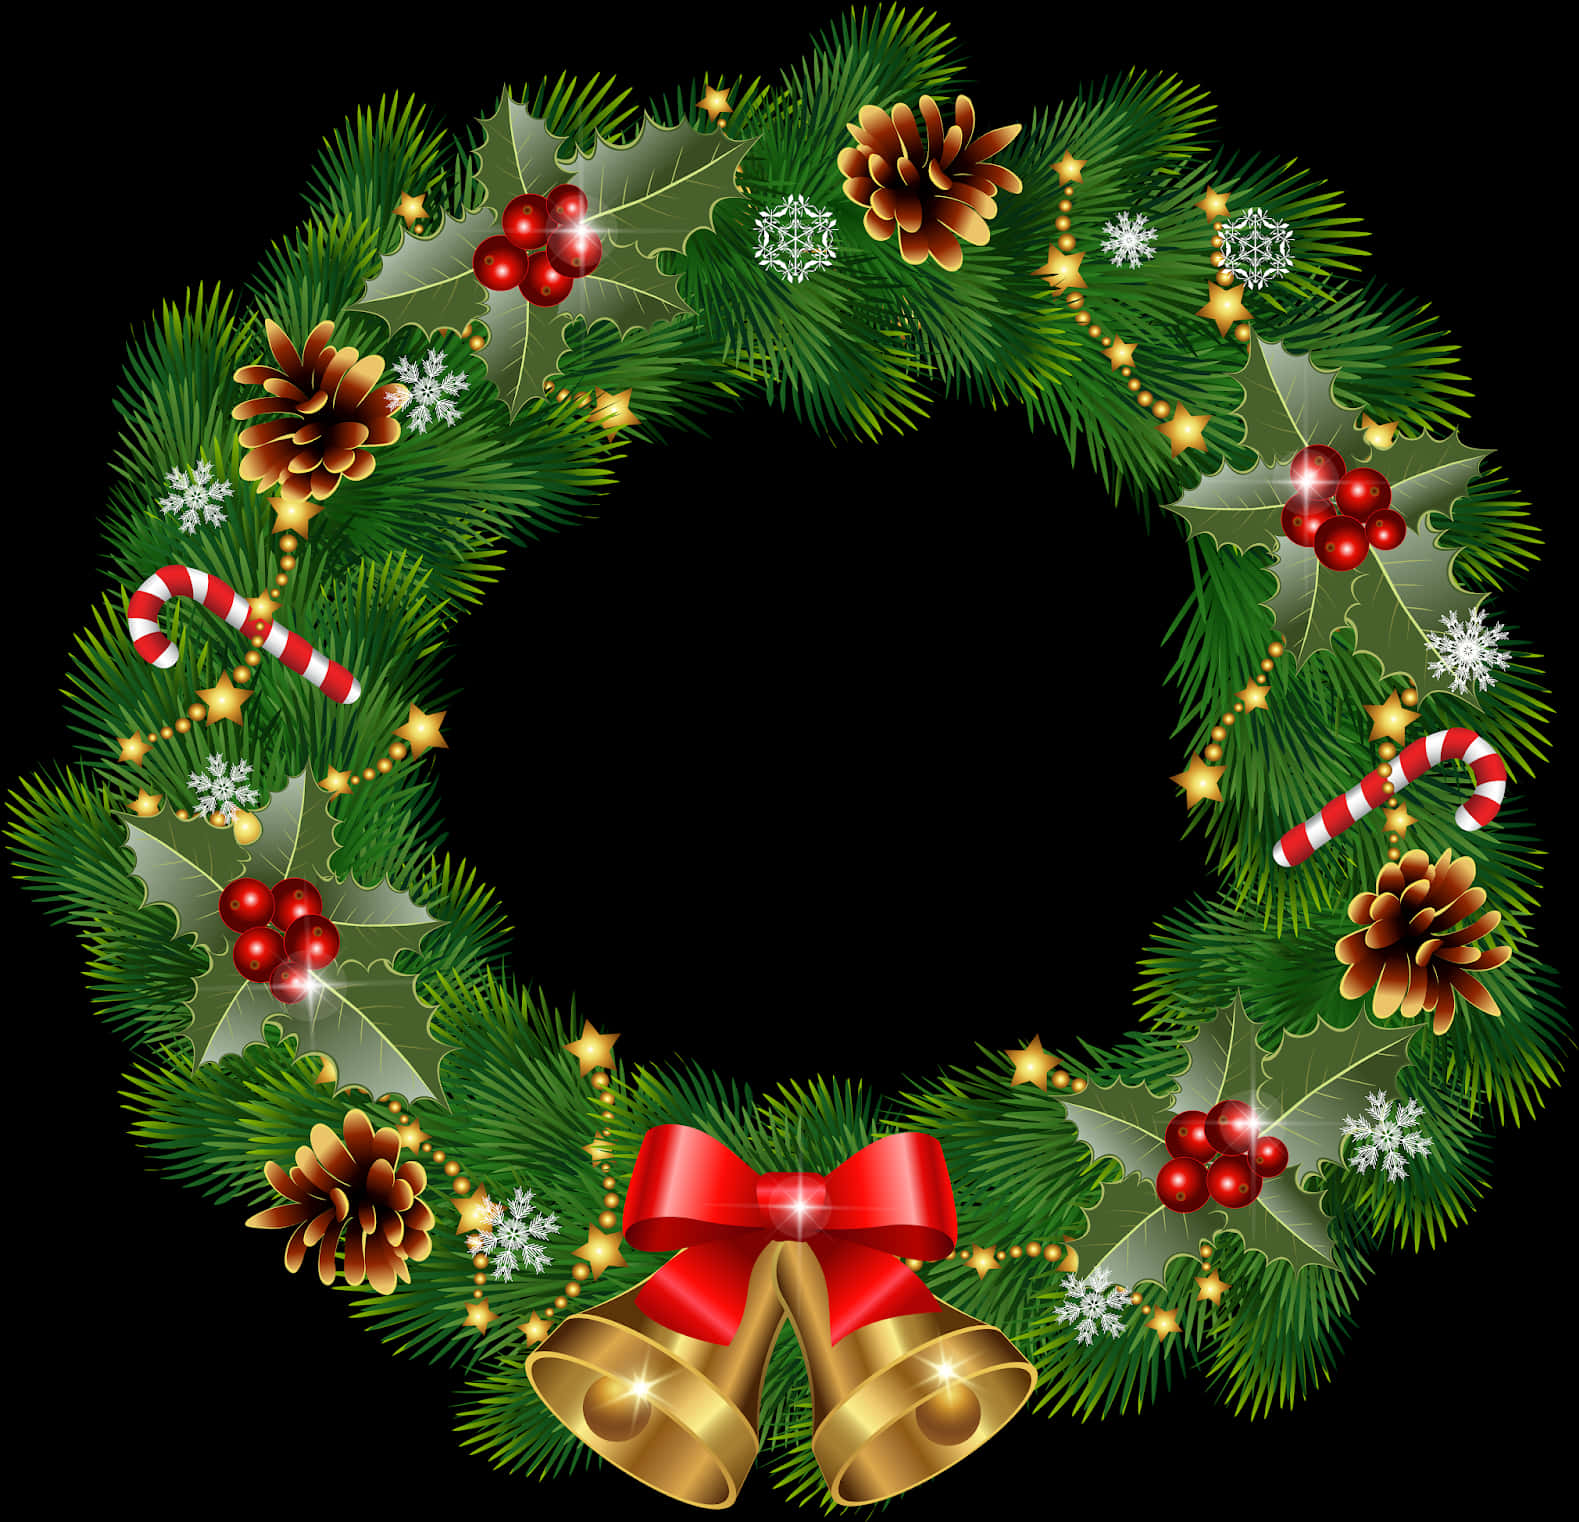 Round Christmas Wreath With Decorations